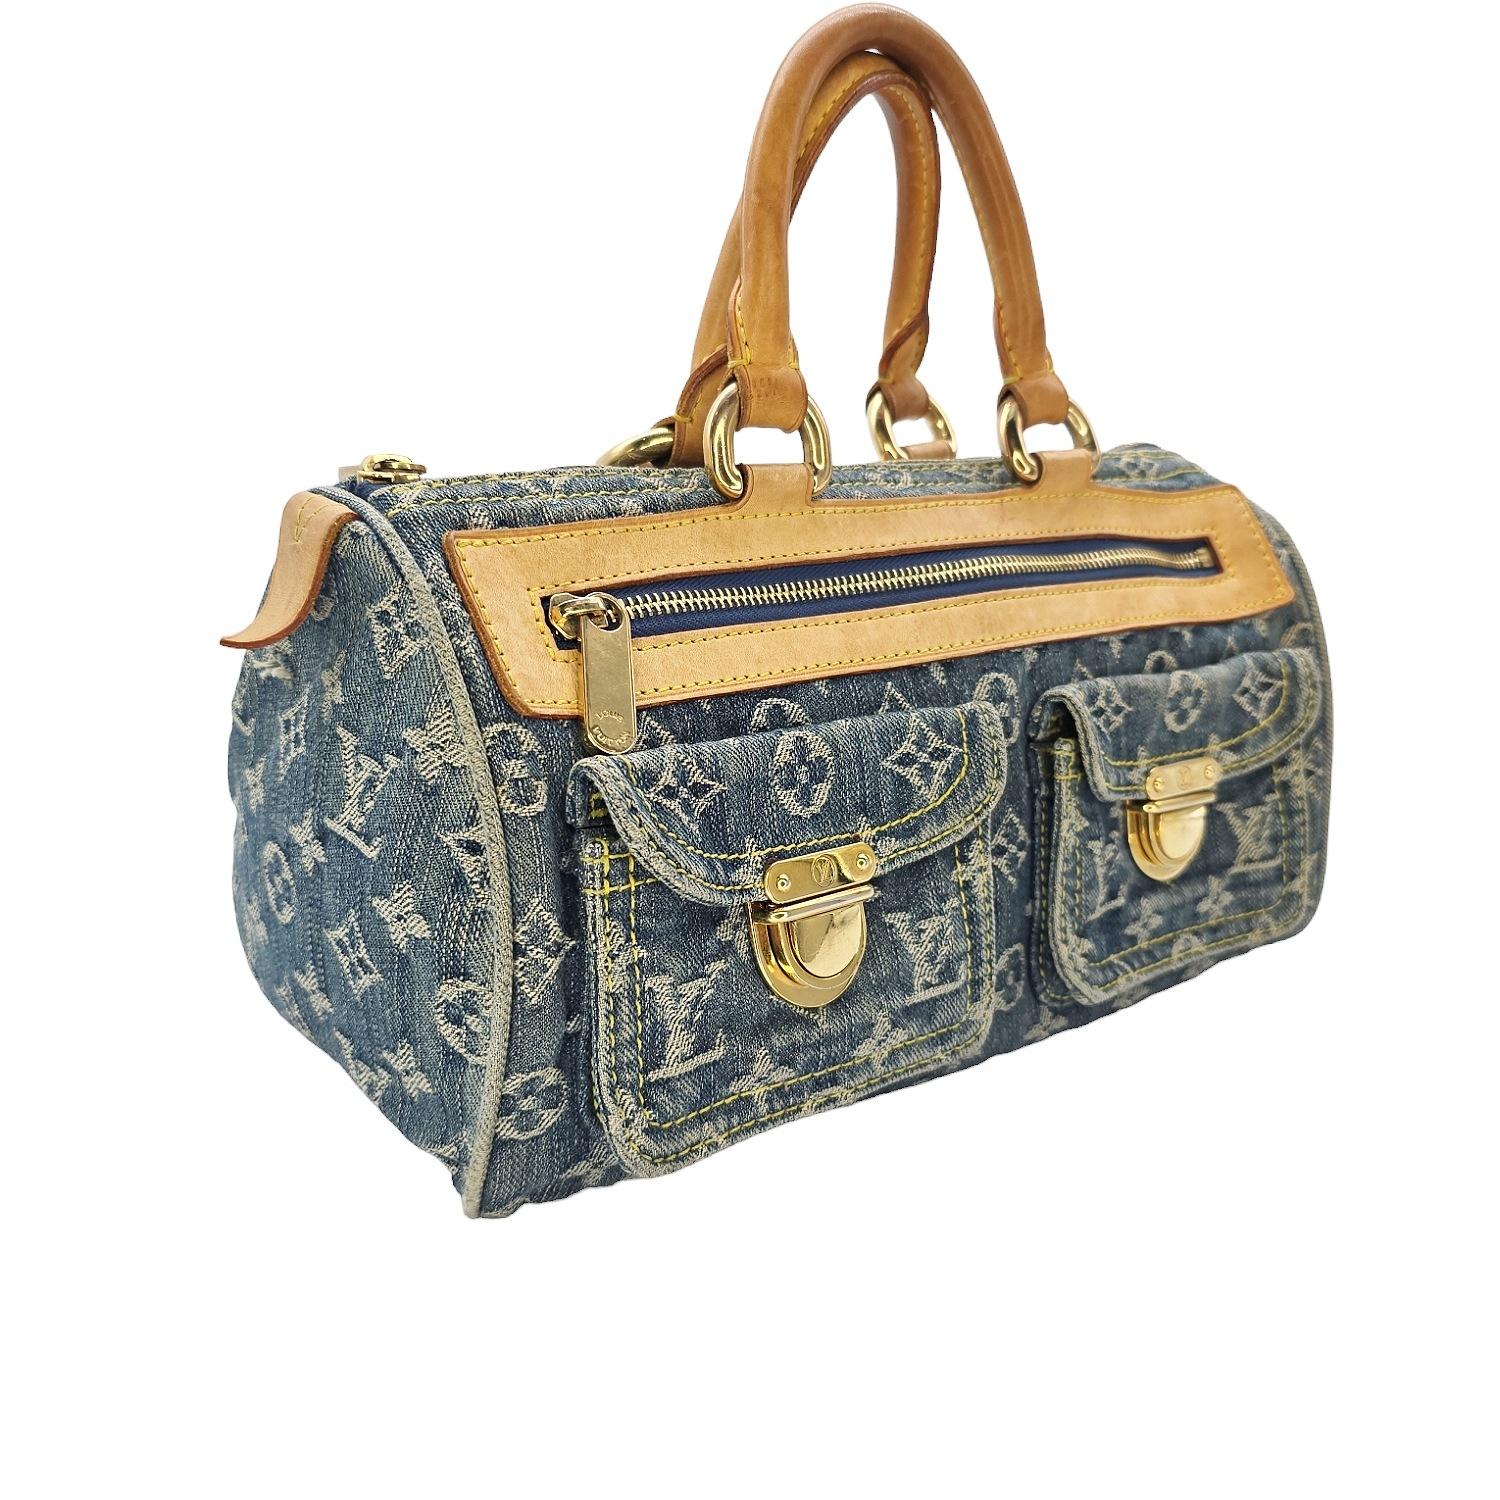 Experience timeless luxury with the Louis Vuitton Monogram Denim Neo Speedy Handbag. From the 2005 Collection by Marc Jacobs. This iconic bag, features the brand's signature monogram denim and soft, durable leather accents. The spacious interior is